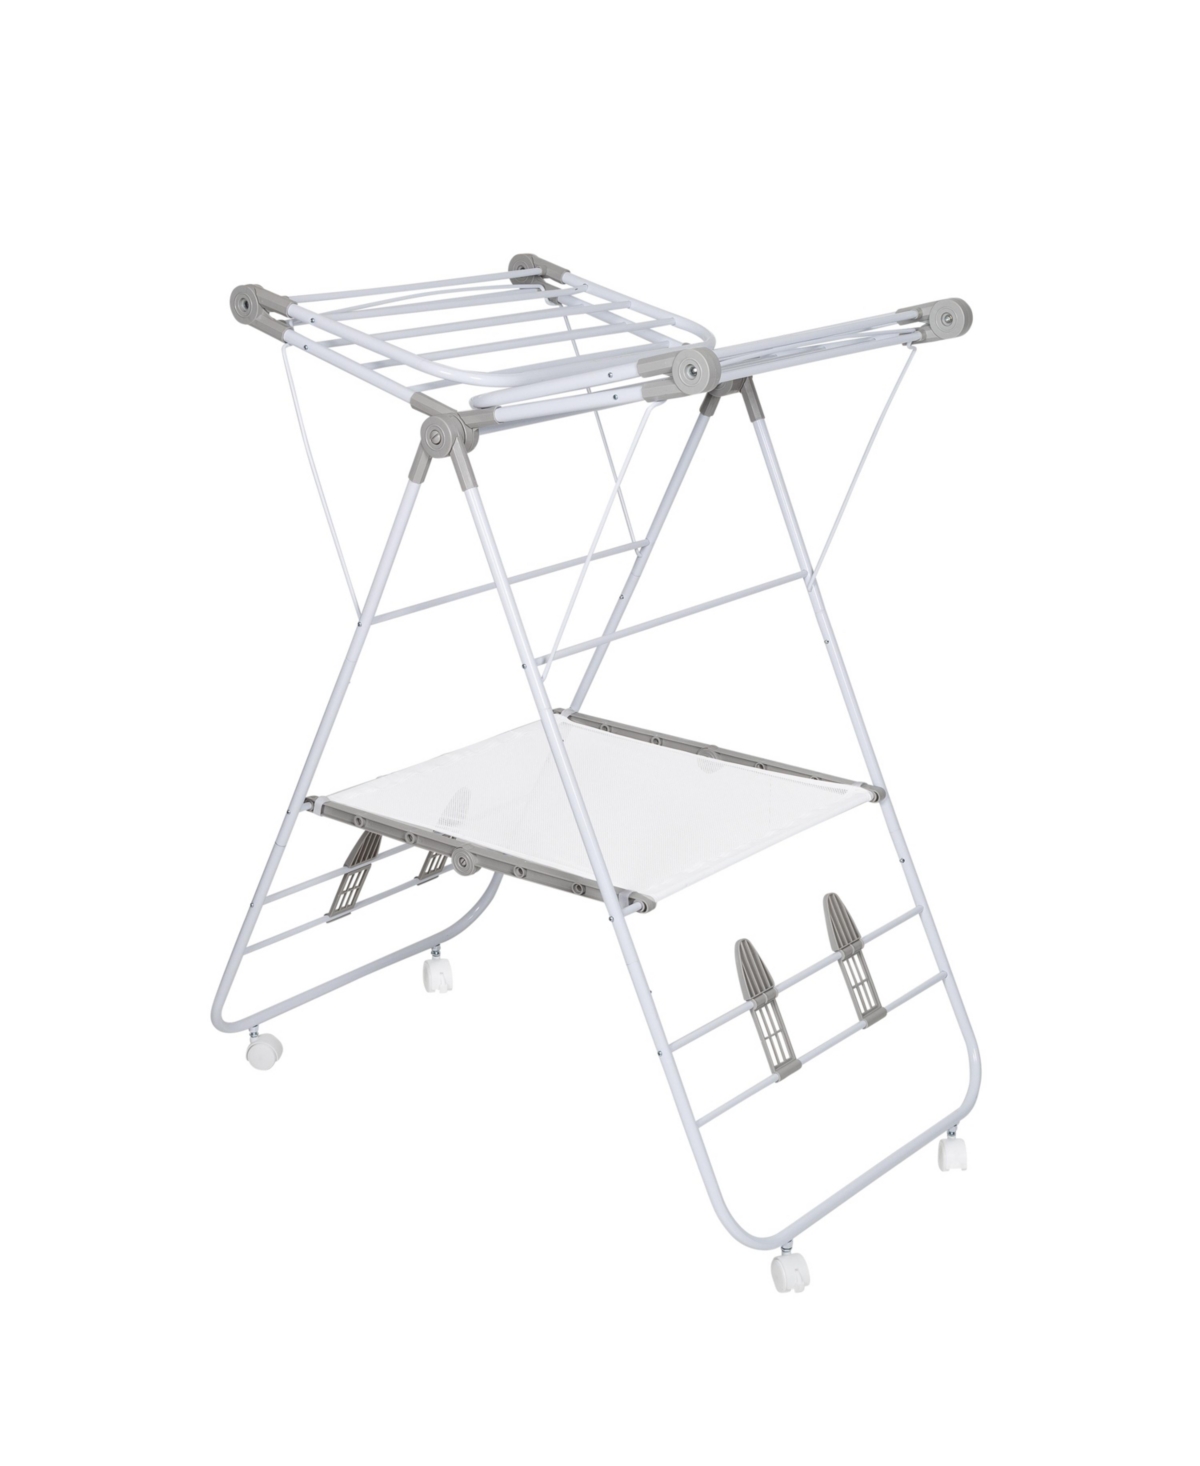 Folding Wing Clothes Dryer with Wheels - White